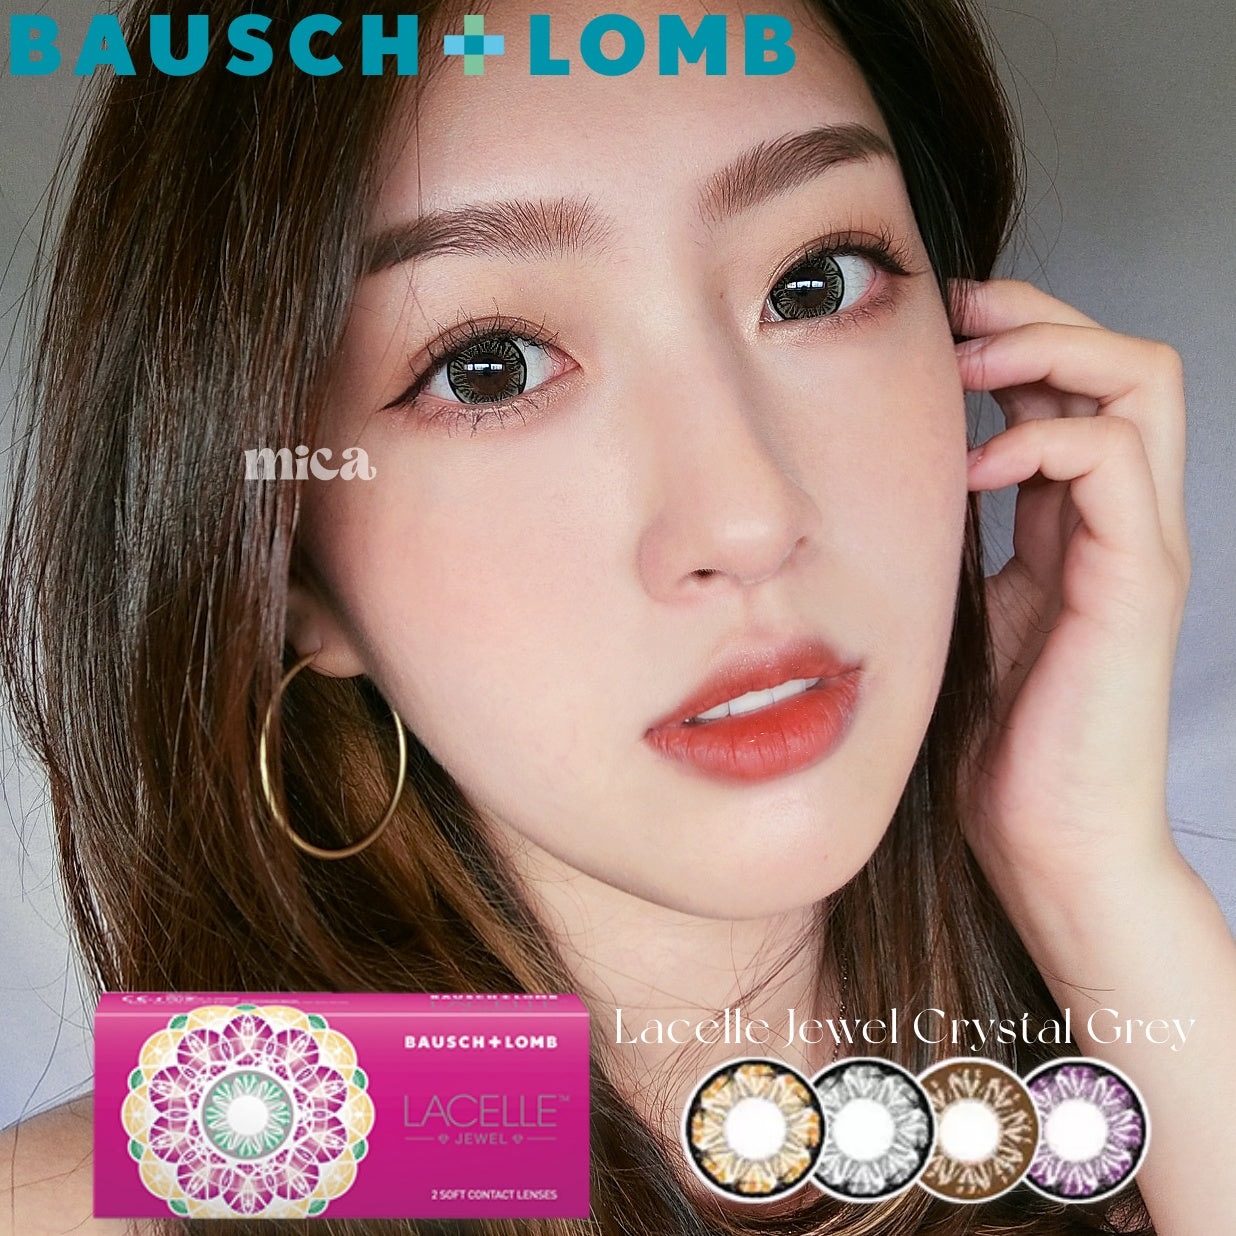 Bausch & Lomb Lacelle Jewel Crystal Grey 0-800 *25step